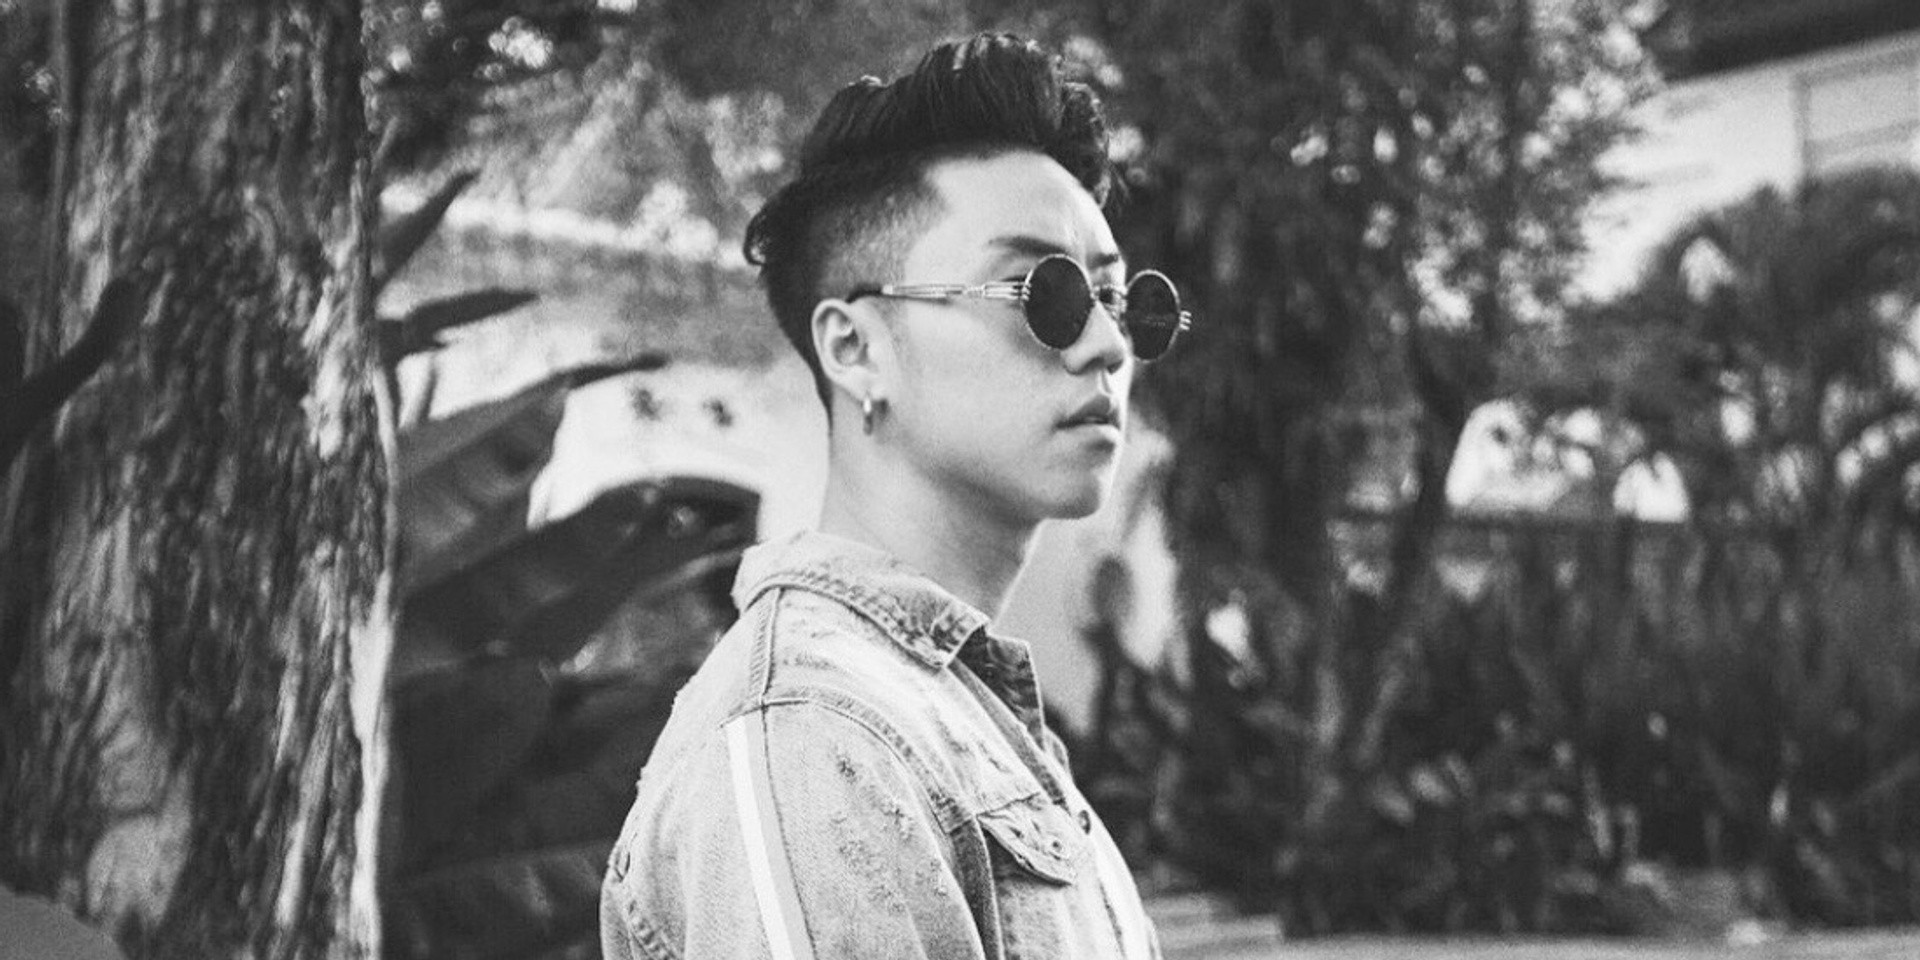 "Like it or not, it's here to stay": An interview with up-and-coming Singaporean producer WUKONG